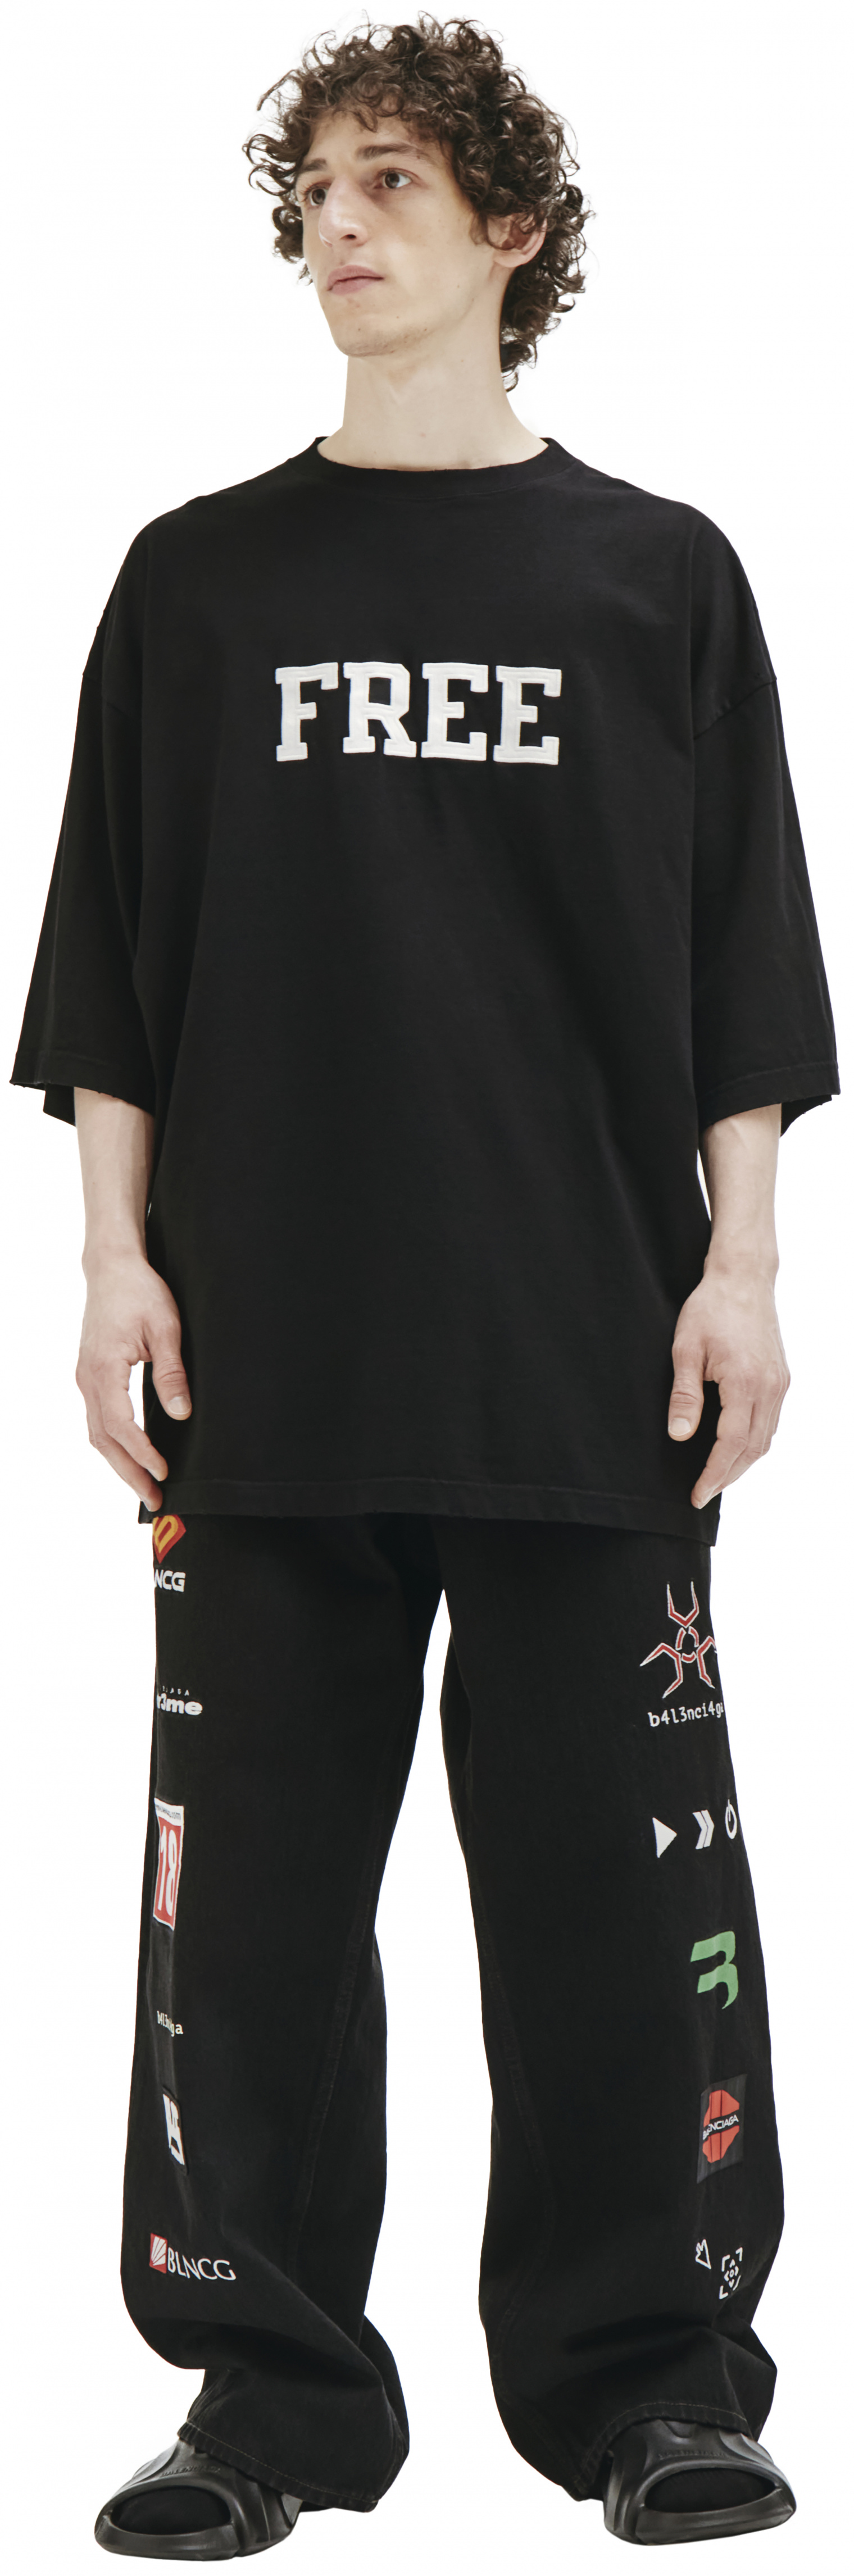 Balenciaga T-shirt With Embroidered Lettering FREE